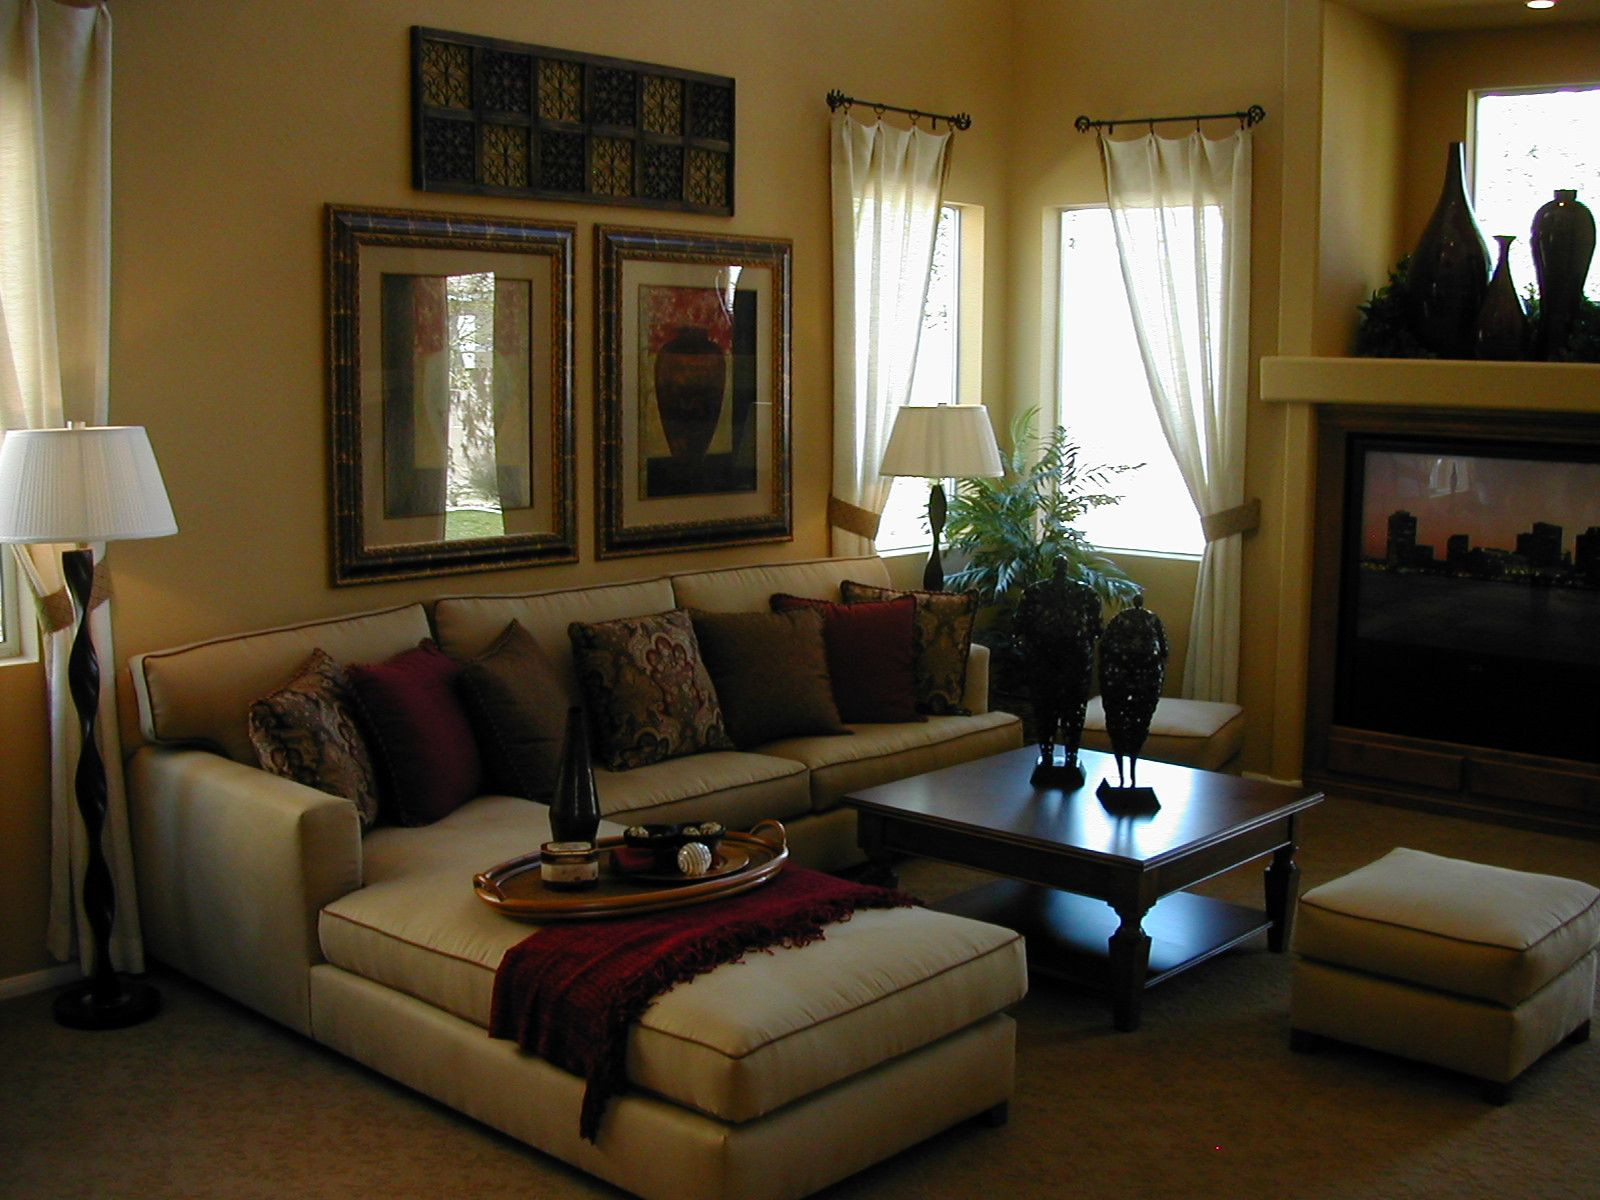 Living Room Theme Ideas
 Living Room Furniture Layout Ideas for Different Room